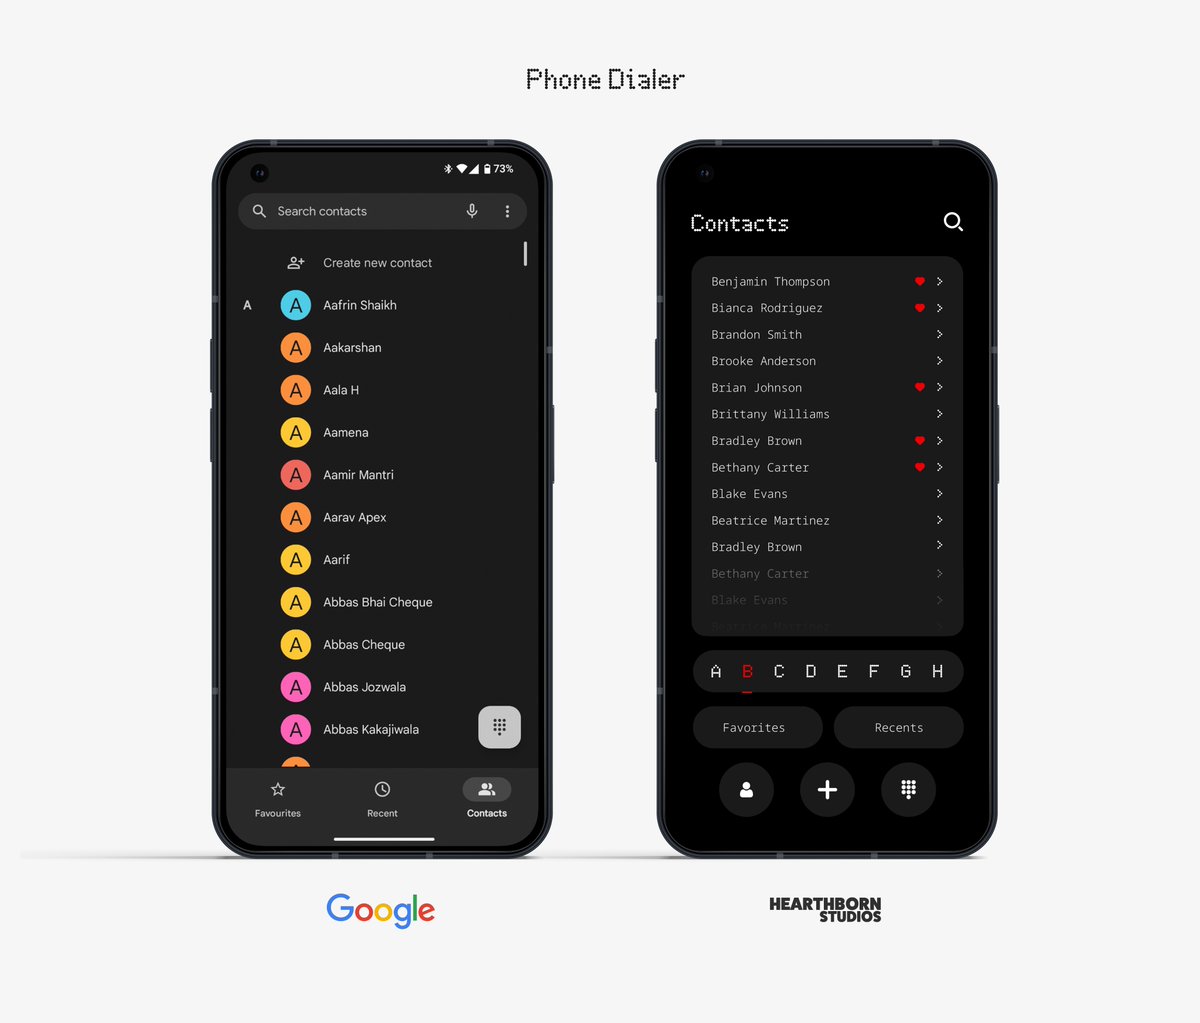 N Dial: The most unique dialer in a decade! This is how it compares to Google.

#nothing #nothingphone2 #nothingphone #apps #appdevelopment #dialer #trending #android #Androidcommunity #nothingcommunity #design #appdesign #google #googledialer